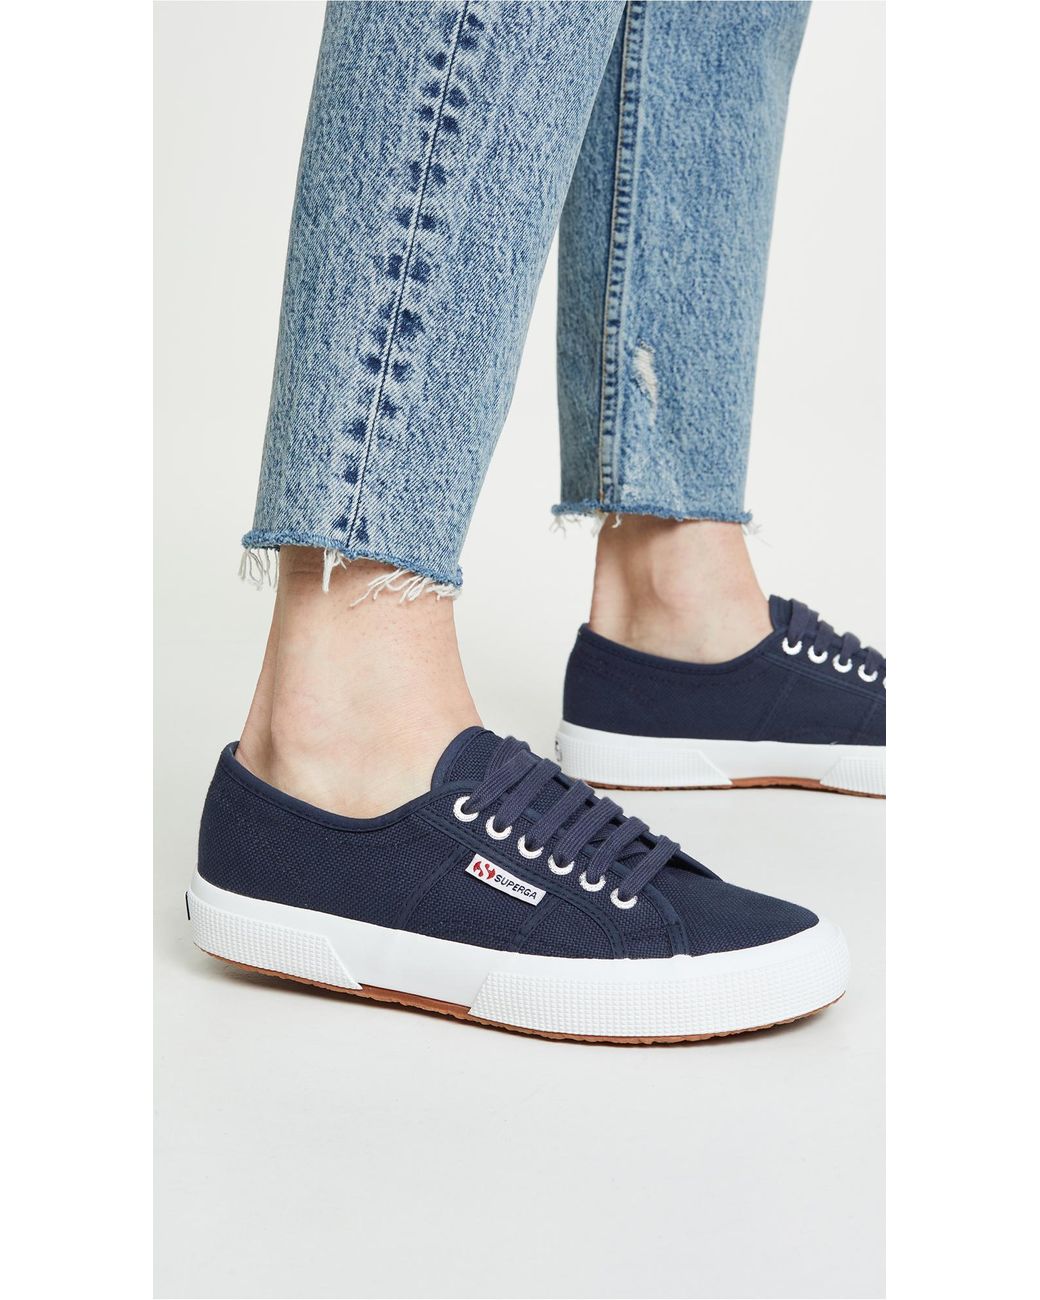 Cotu Classic Lace Up Sneakers in Navy 